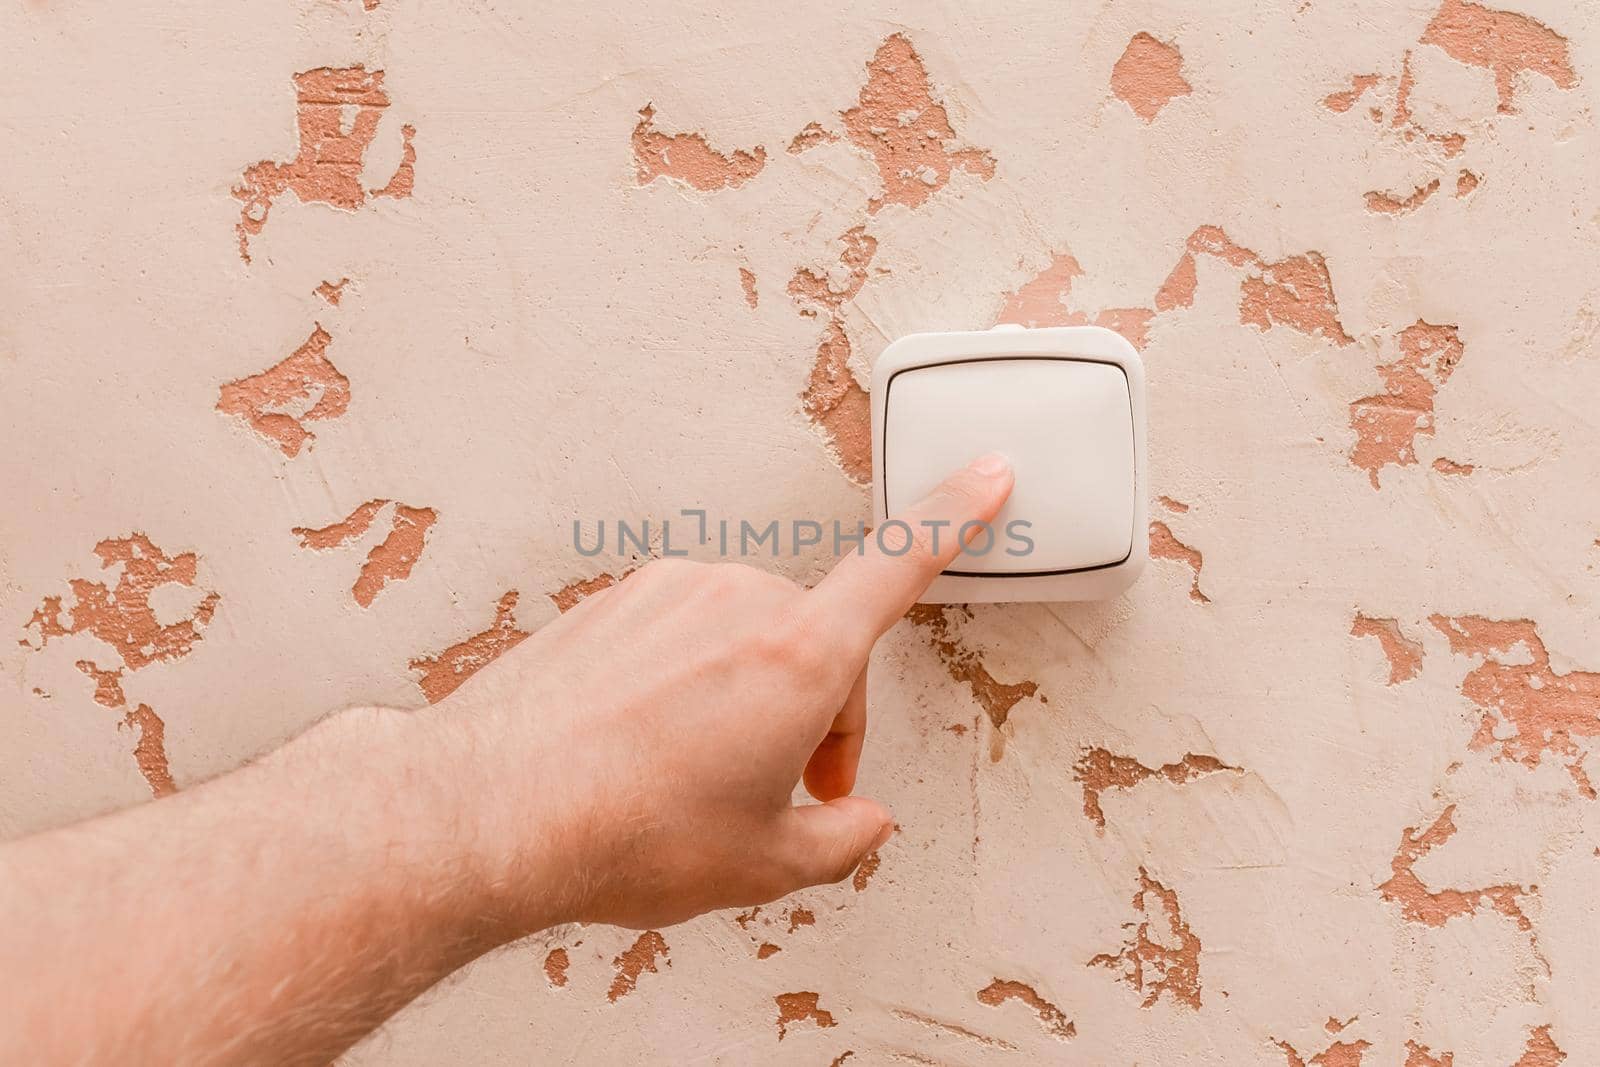 The guy's hand turns off the light with an electric switch in a modern room interior background.